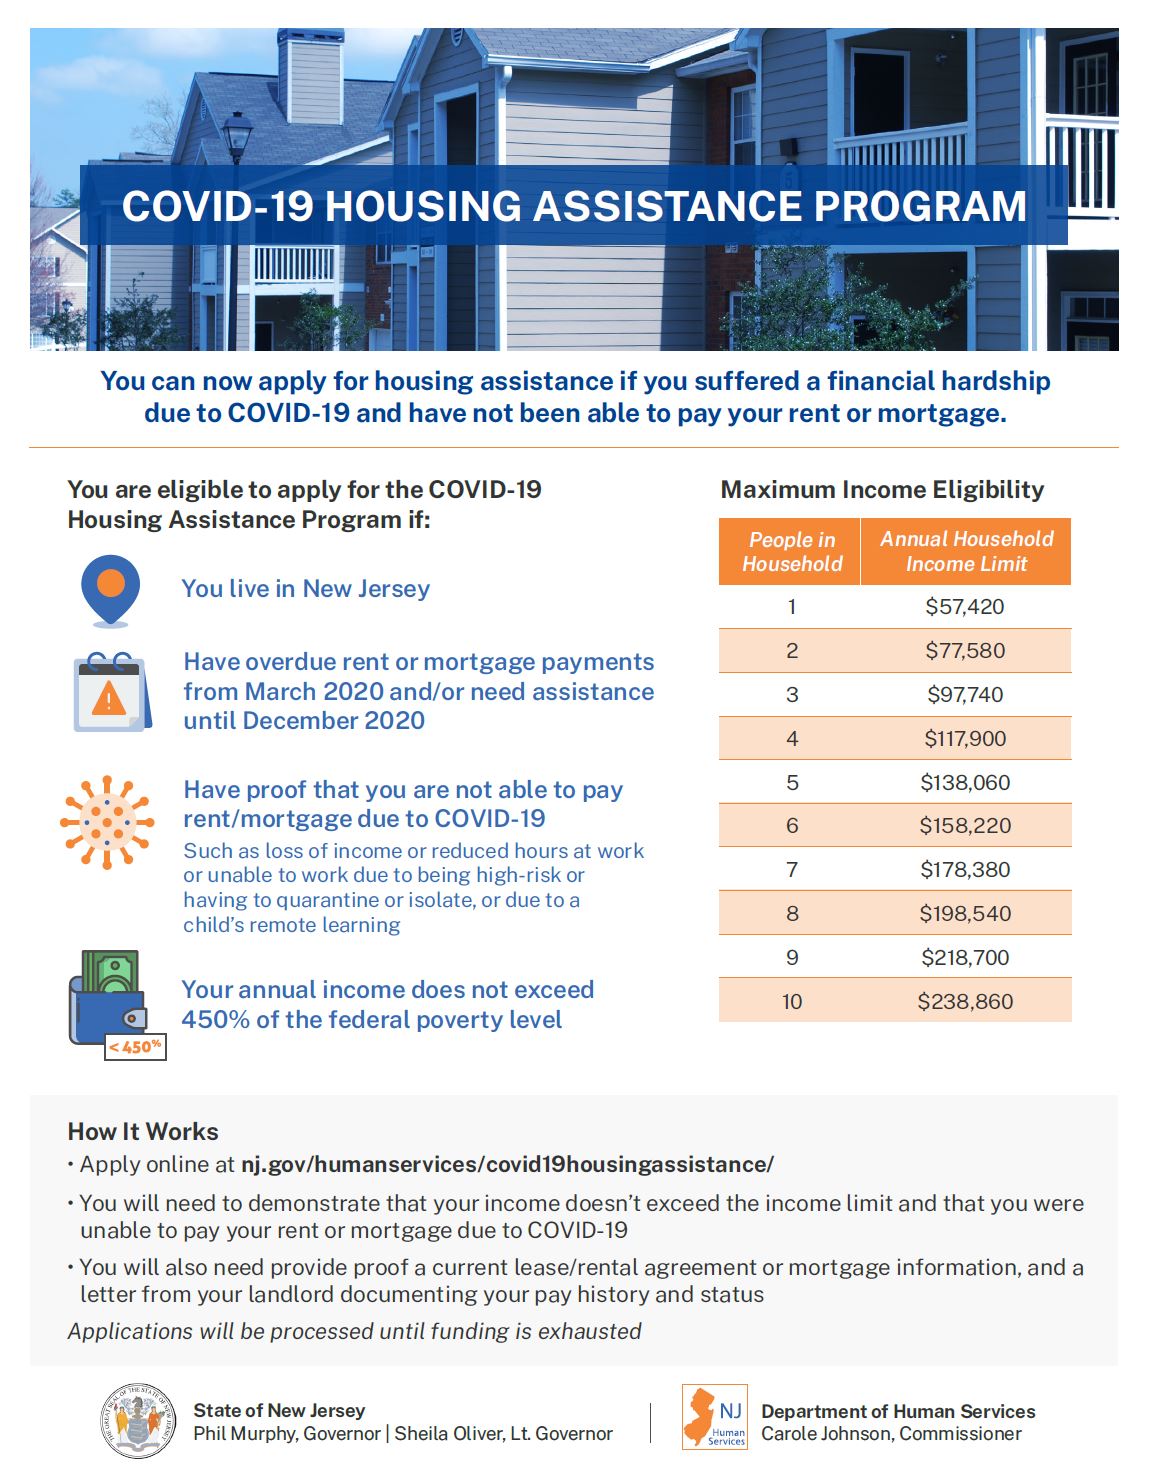 COVID-19 Housing Assistance